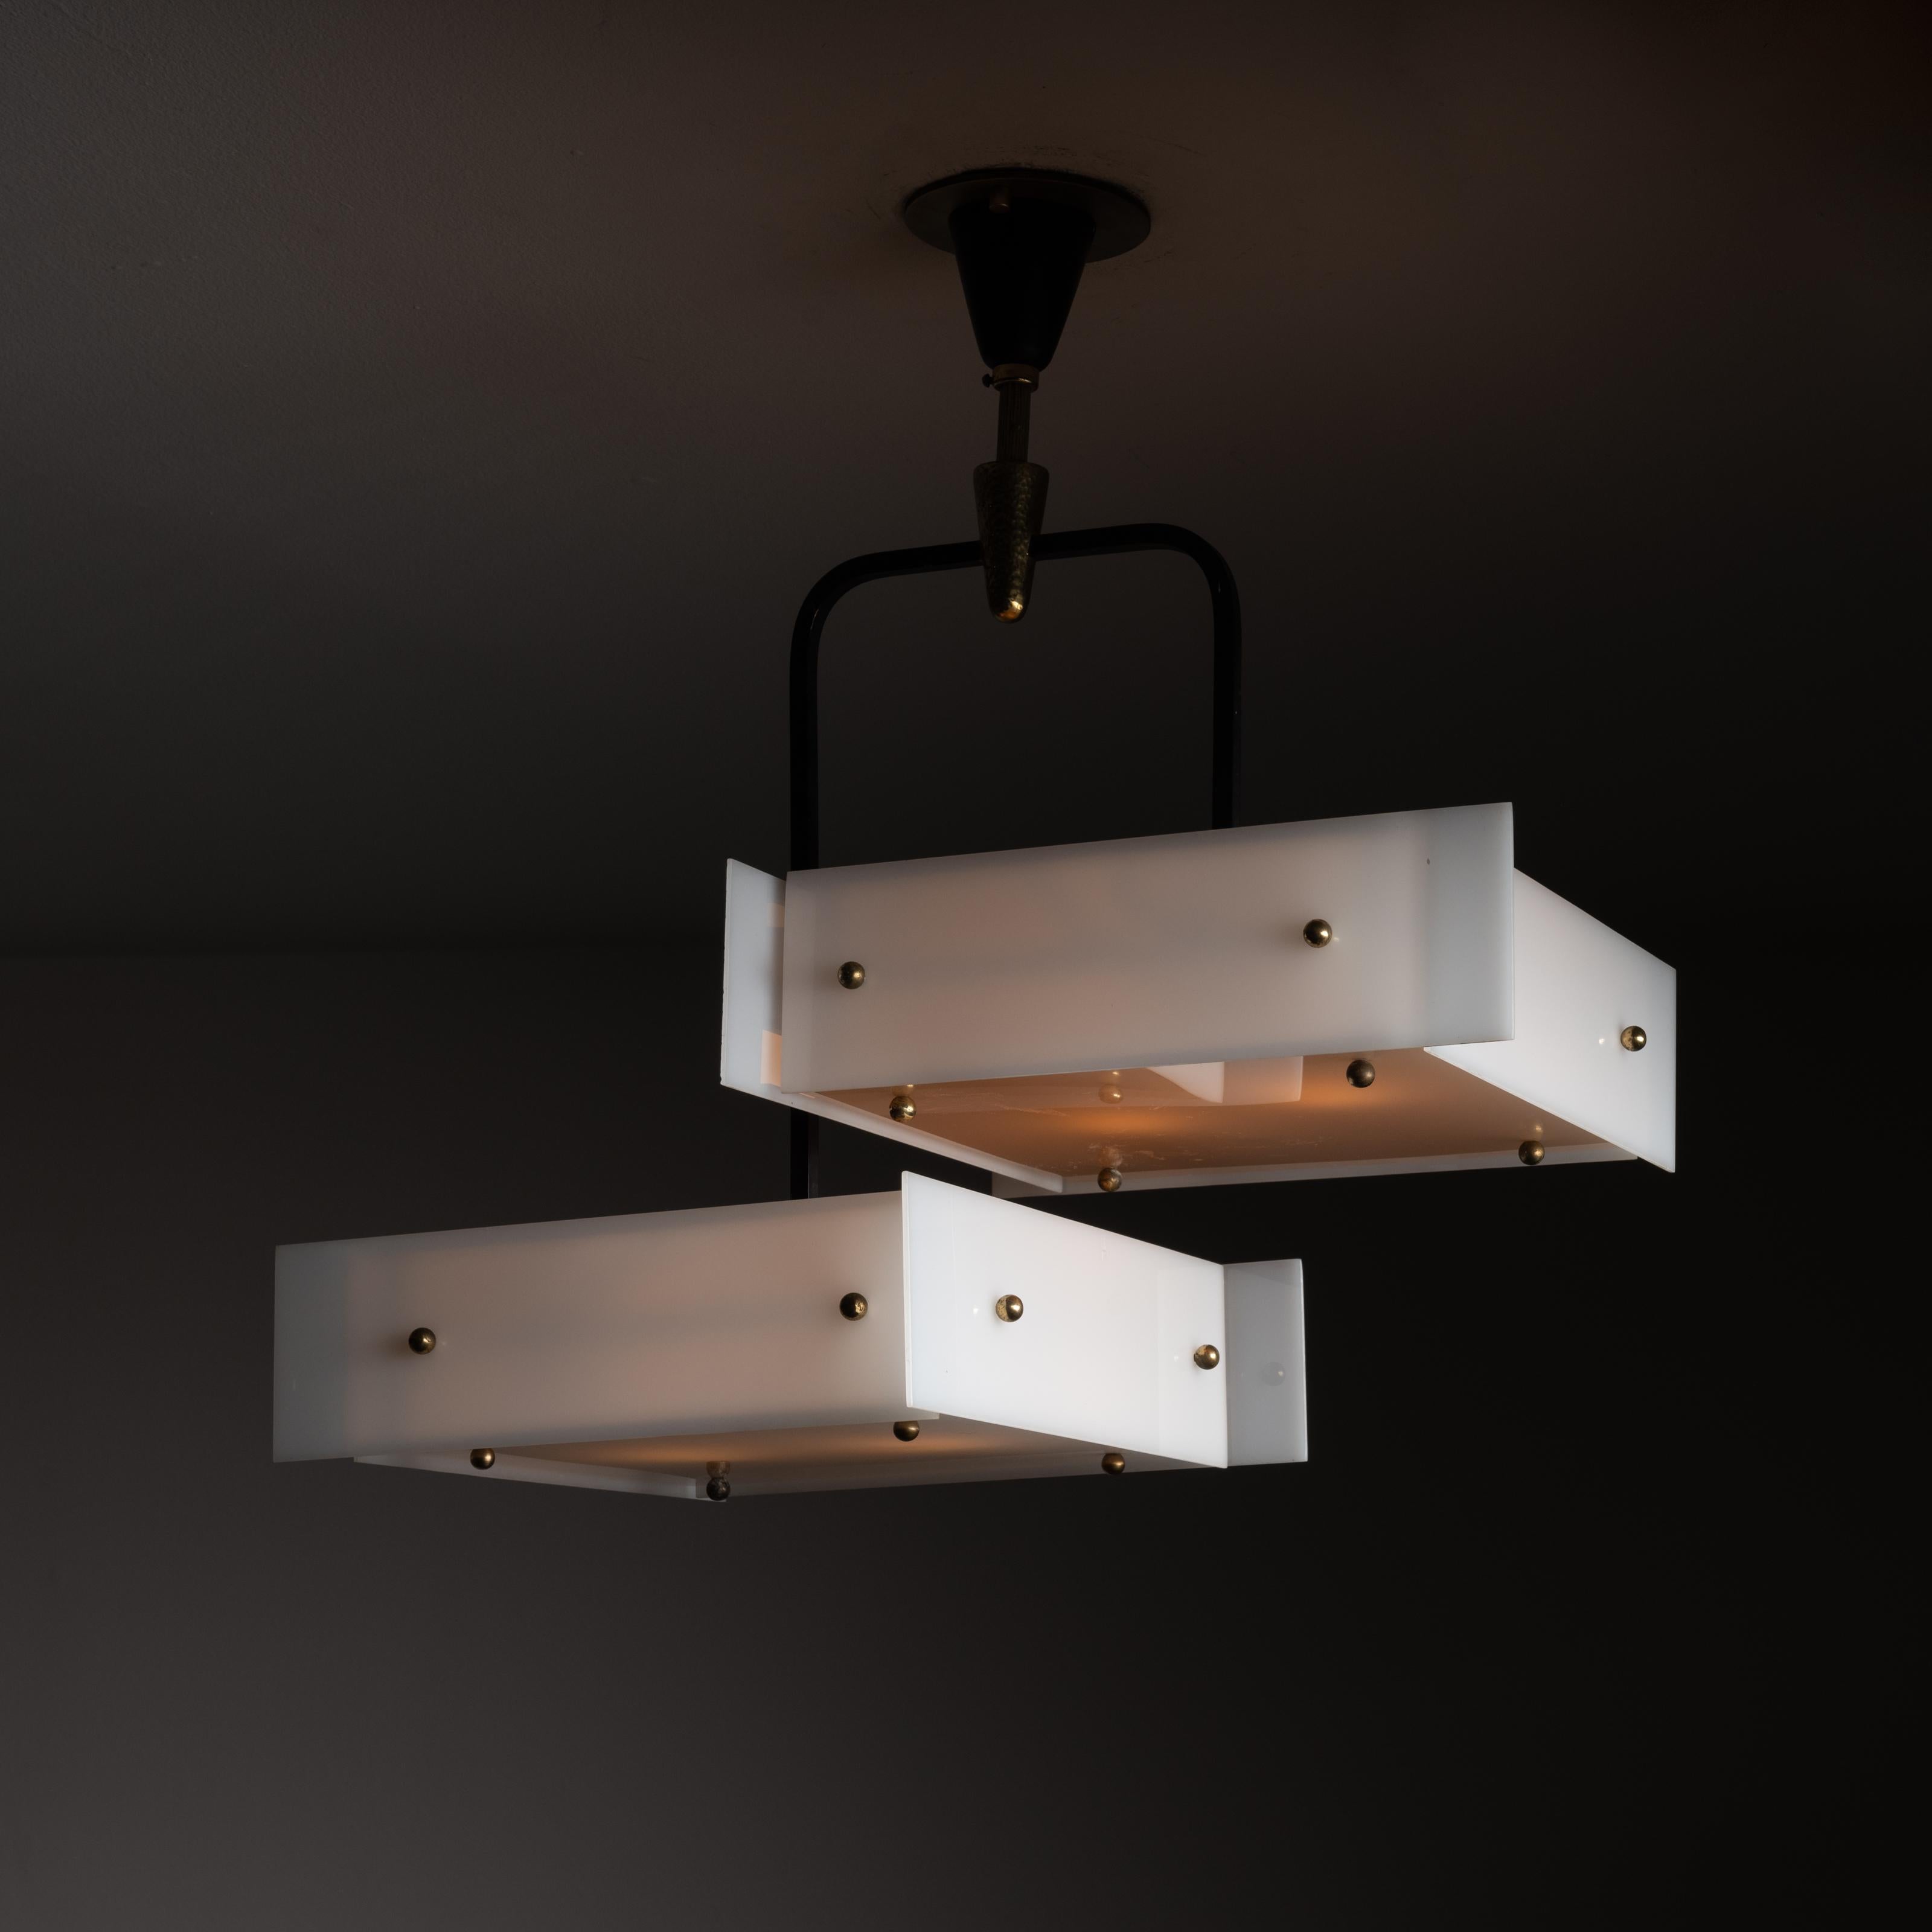 Ceiling light by Stilux. Designed and manufactured in Italy, circa the 1960s. Lucite paneled light boxes are suspended by a two armed enamel rods. Canopy has a hammered brass coupling. Custom backplate for US standards. Holds four e14 socket types,